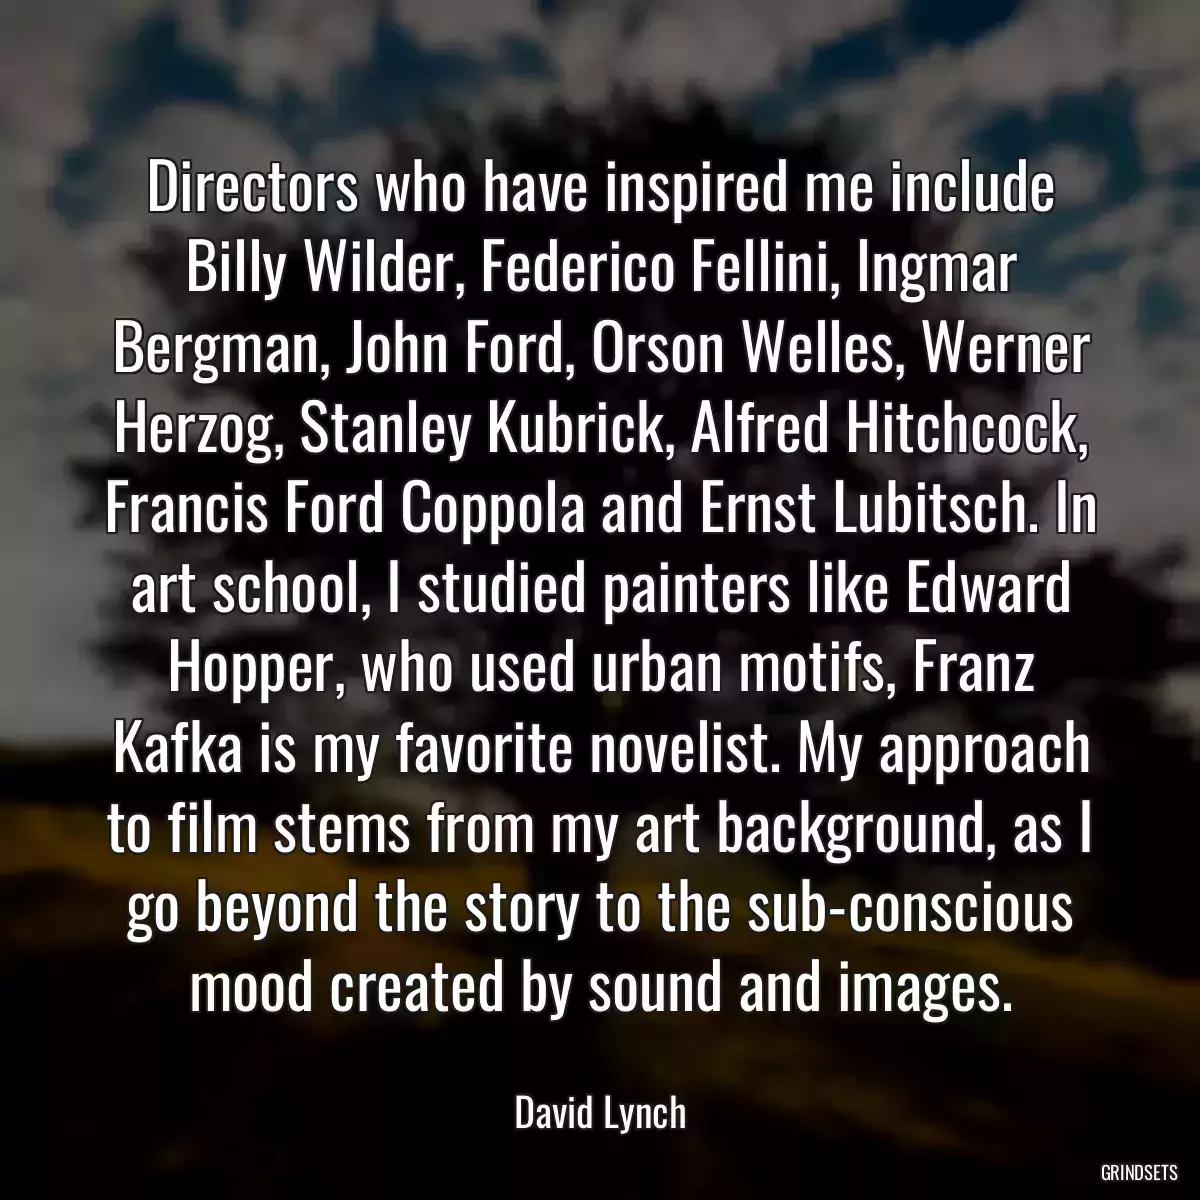 Directors who have inspired me include Billy Wilder, Federico Fellini, lngmar Bergman, John Ford, Orson Welles, Werner Herzog, Stanley Kubrick, Alfred Hitchcock, Francis Ford Coppola and Ernst Lubitsch. In art school, I studied painters like Edward Hopper, who used urban motifs, Franz Kafka is my favorite novelist. My approach to film stems from my art background, as I go beyond the story to the sub-conscious mood created by sound and images.